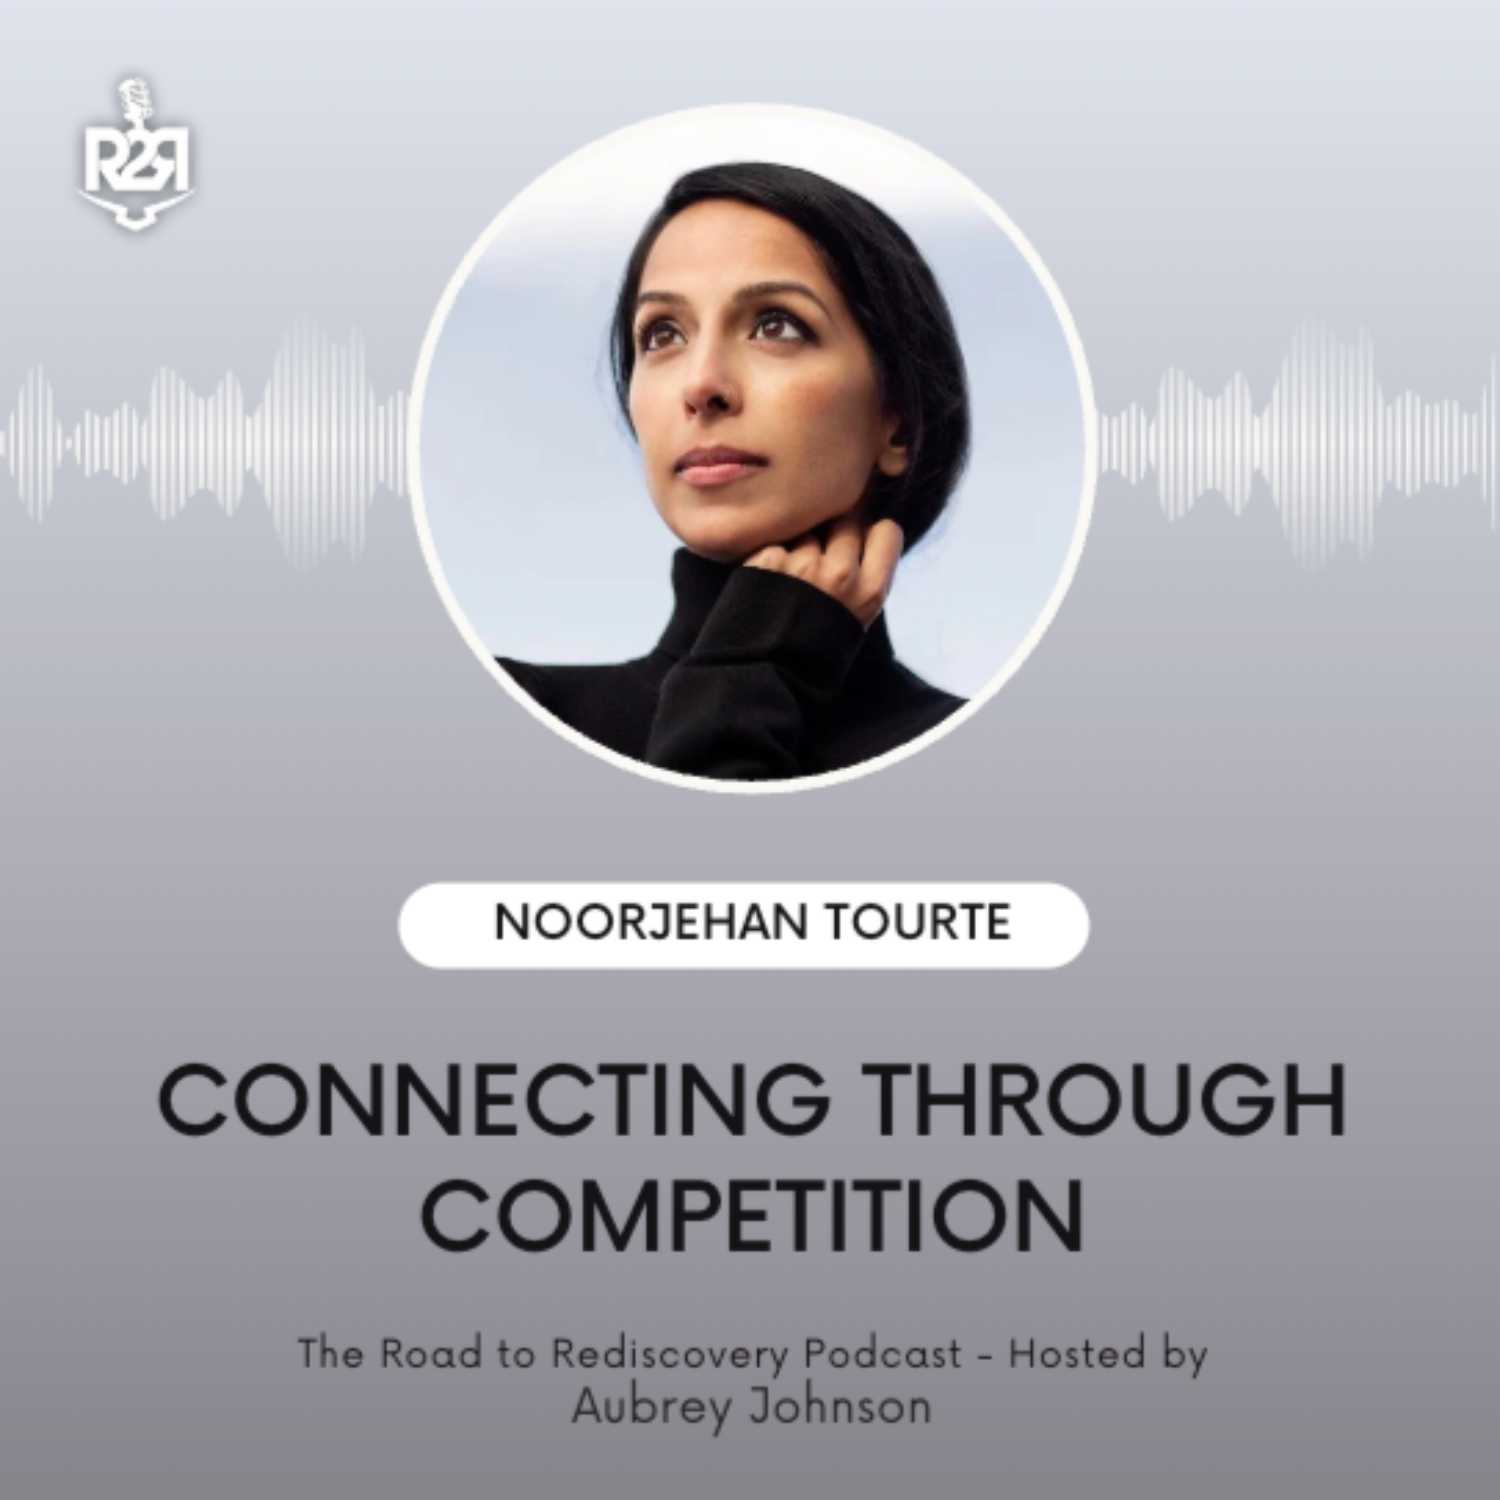 Empowering Women and Overcoming our Struggles with Empathy - with NoorJehan Tourte